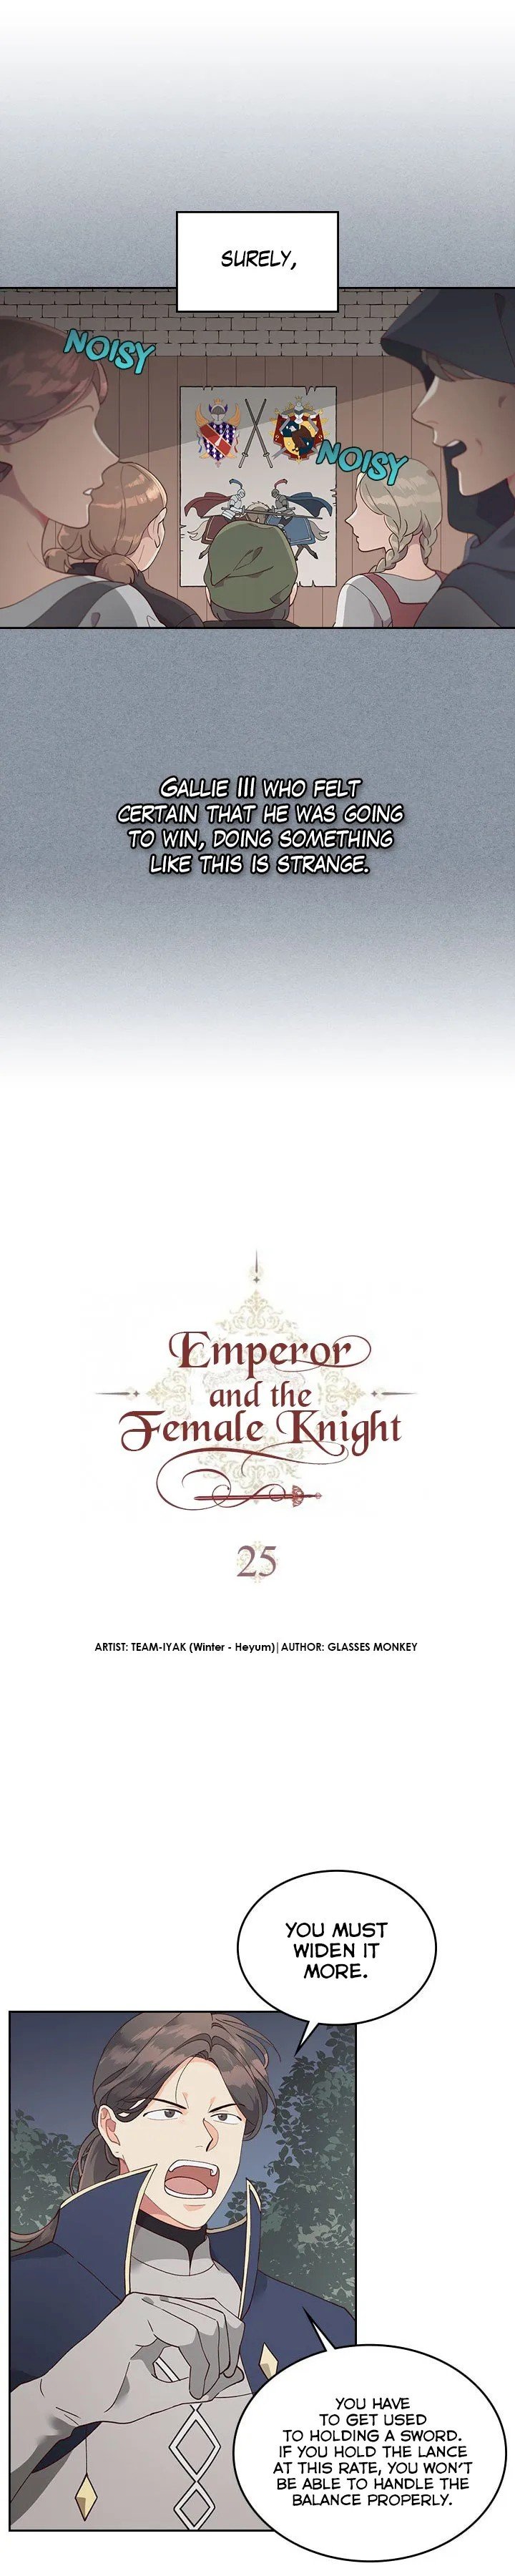 emperor-and-the-female-knight-chap-25-3